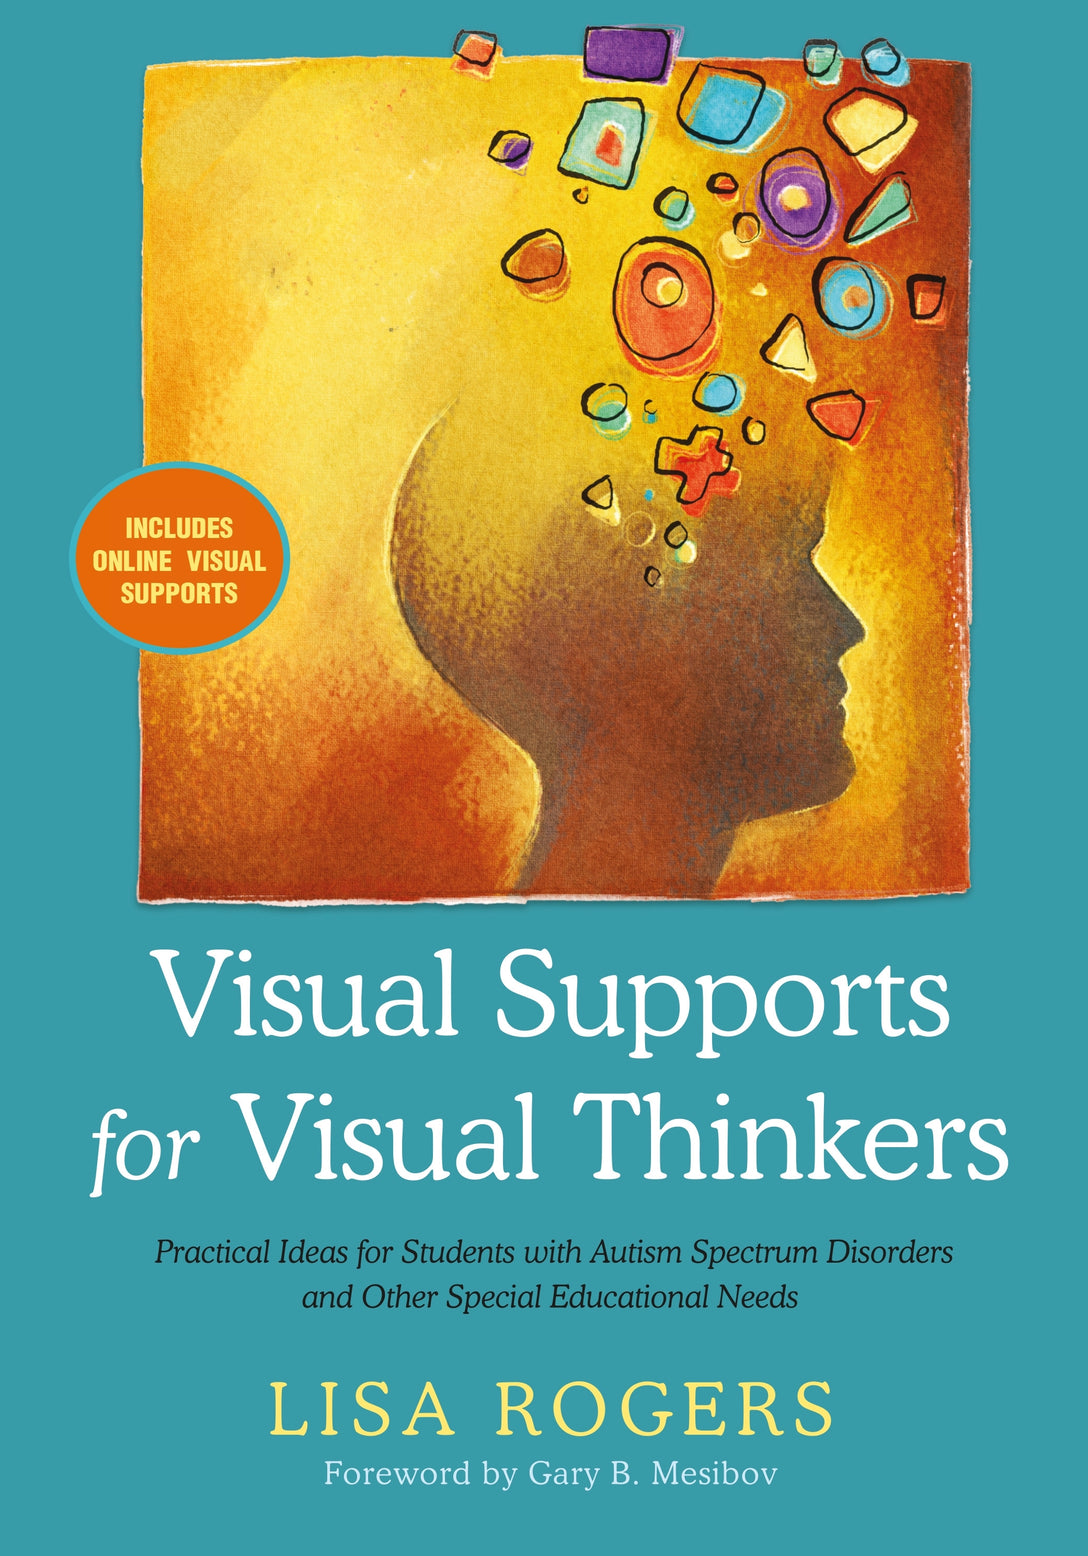 Visual Supports for Visual Thinkers by Lisa Rogers, Gary Mesibov